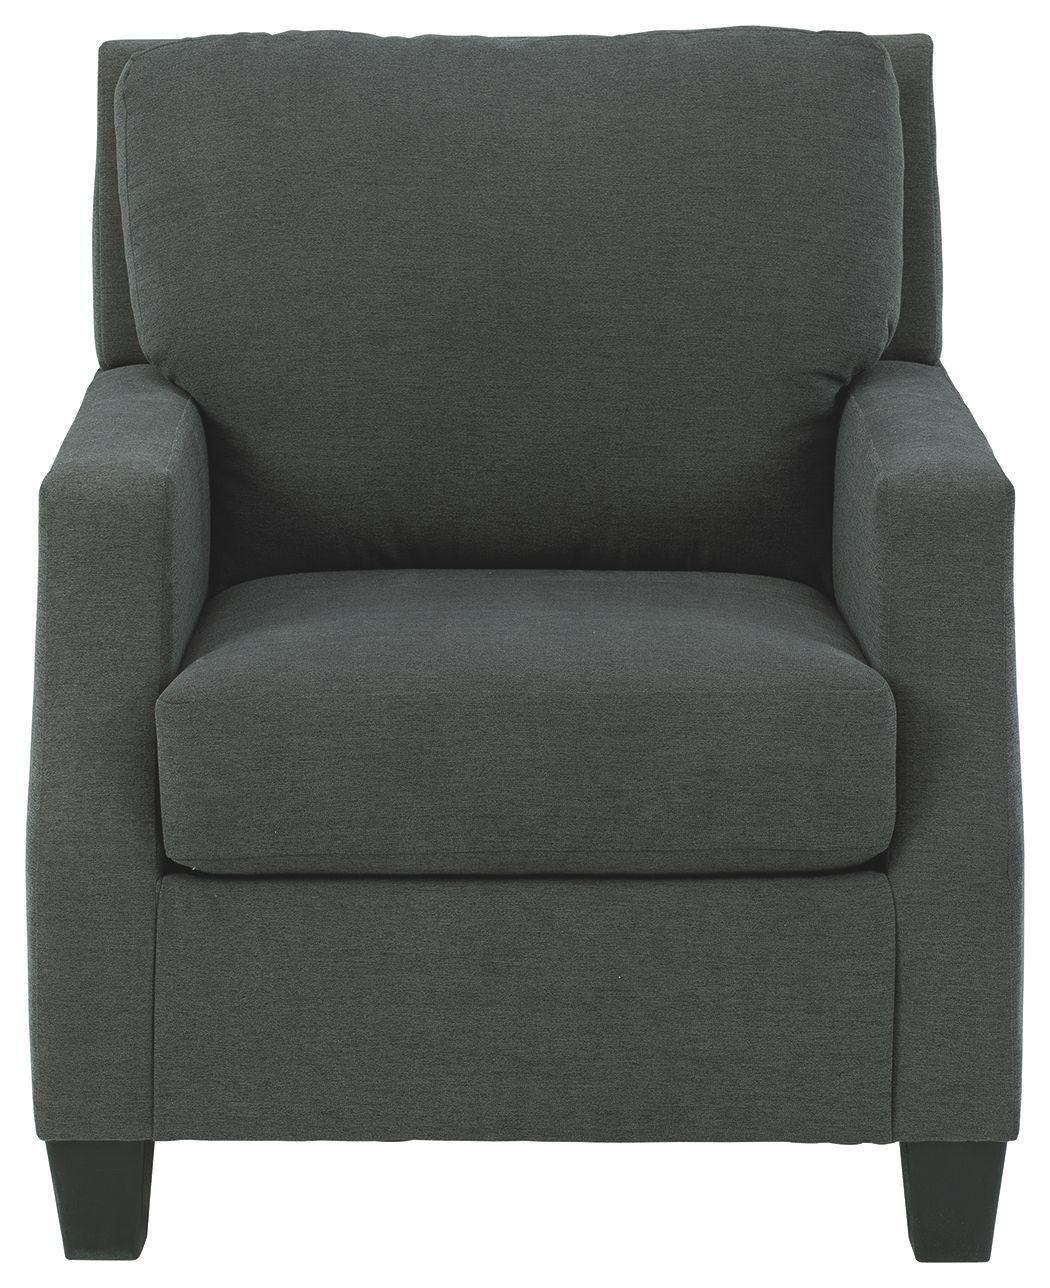 Bayonne - Charcoal - Chair Tony's Home Furnishings Furniture. Beds. Dressers. Sofas.